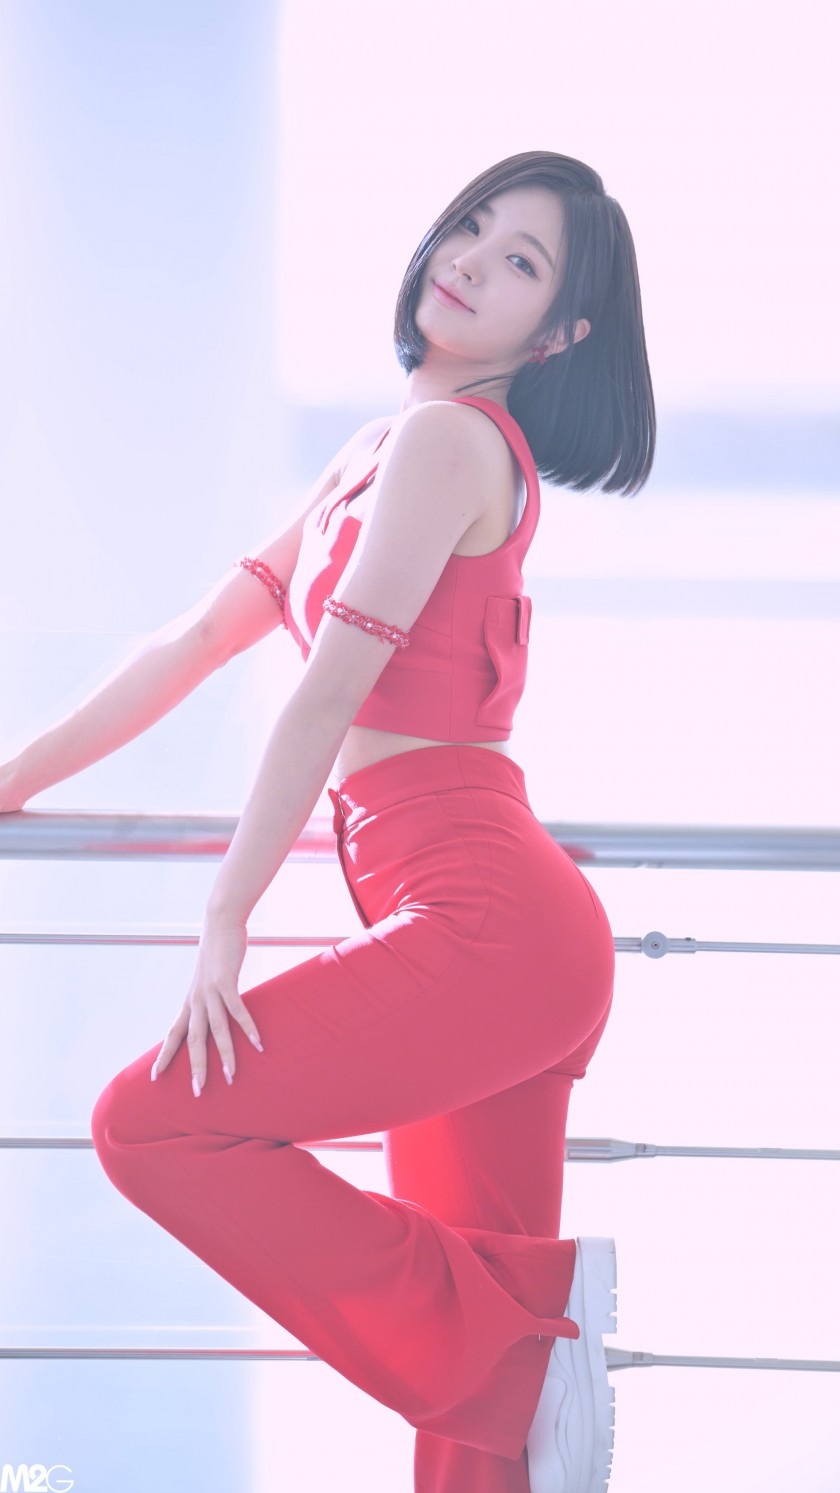 ALICE, angry red pants. ALICE SOHEE